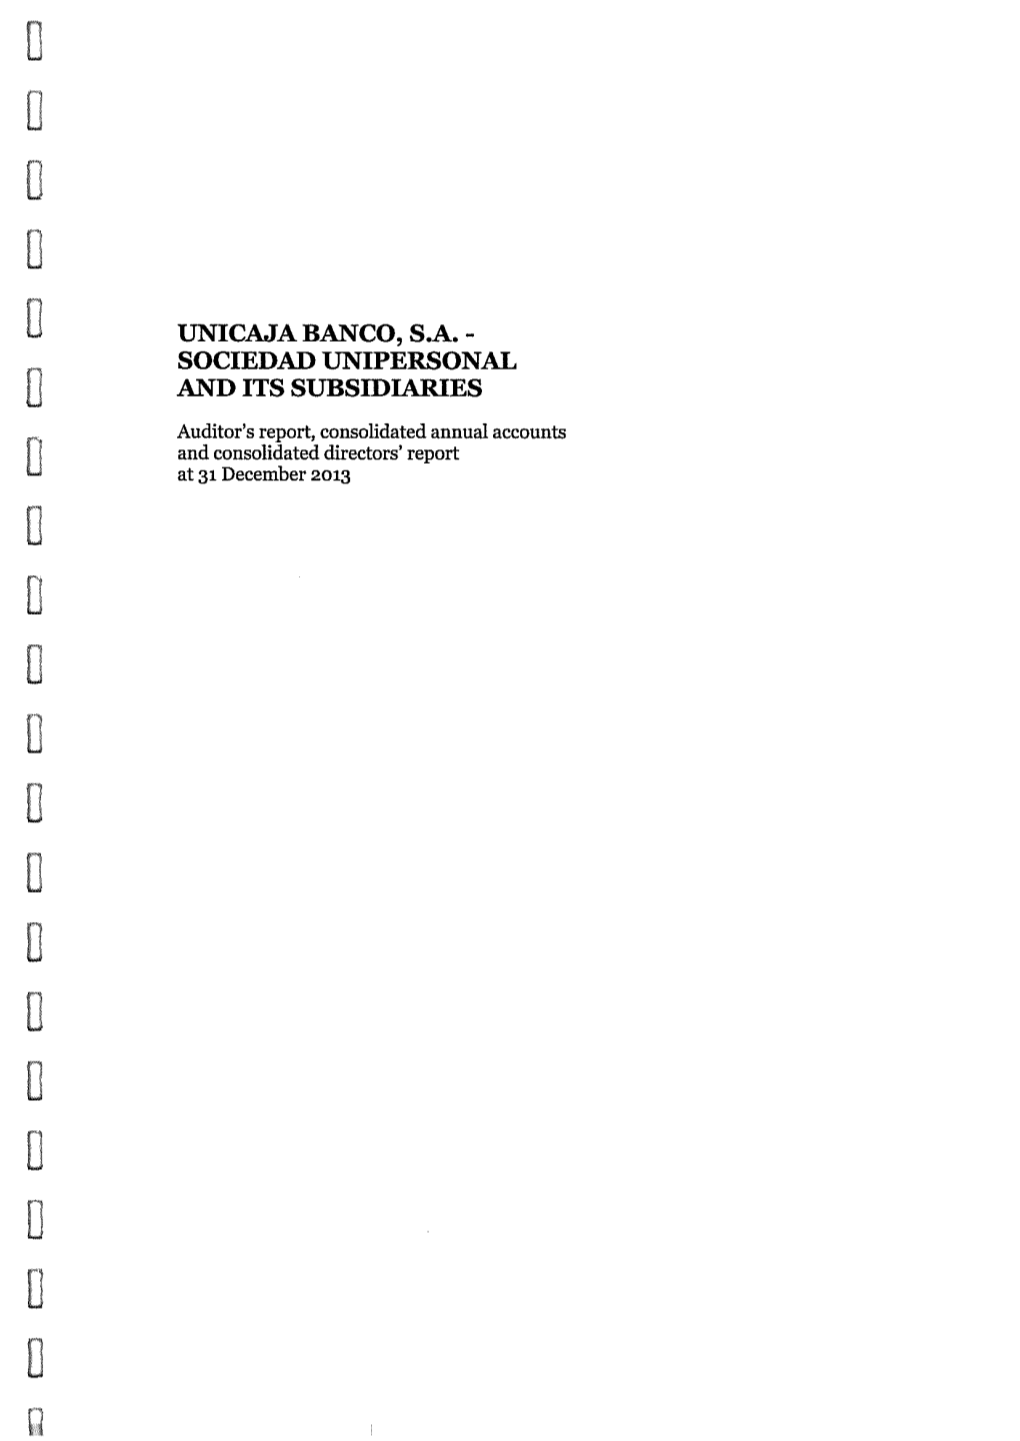 Sociedad Unipersonal and Its Subsidiaries (Unicaja Banco Group)Group)